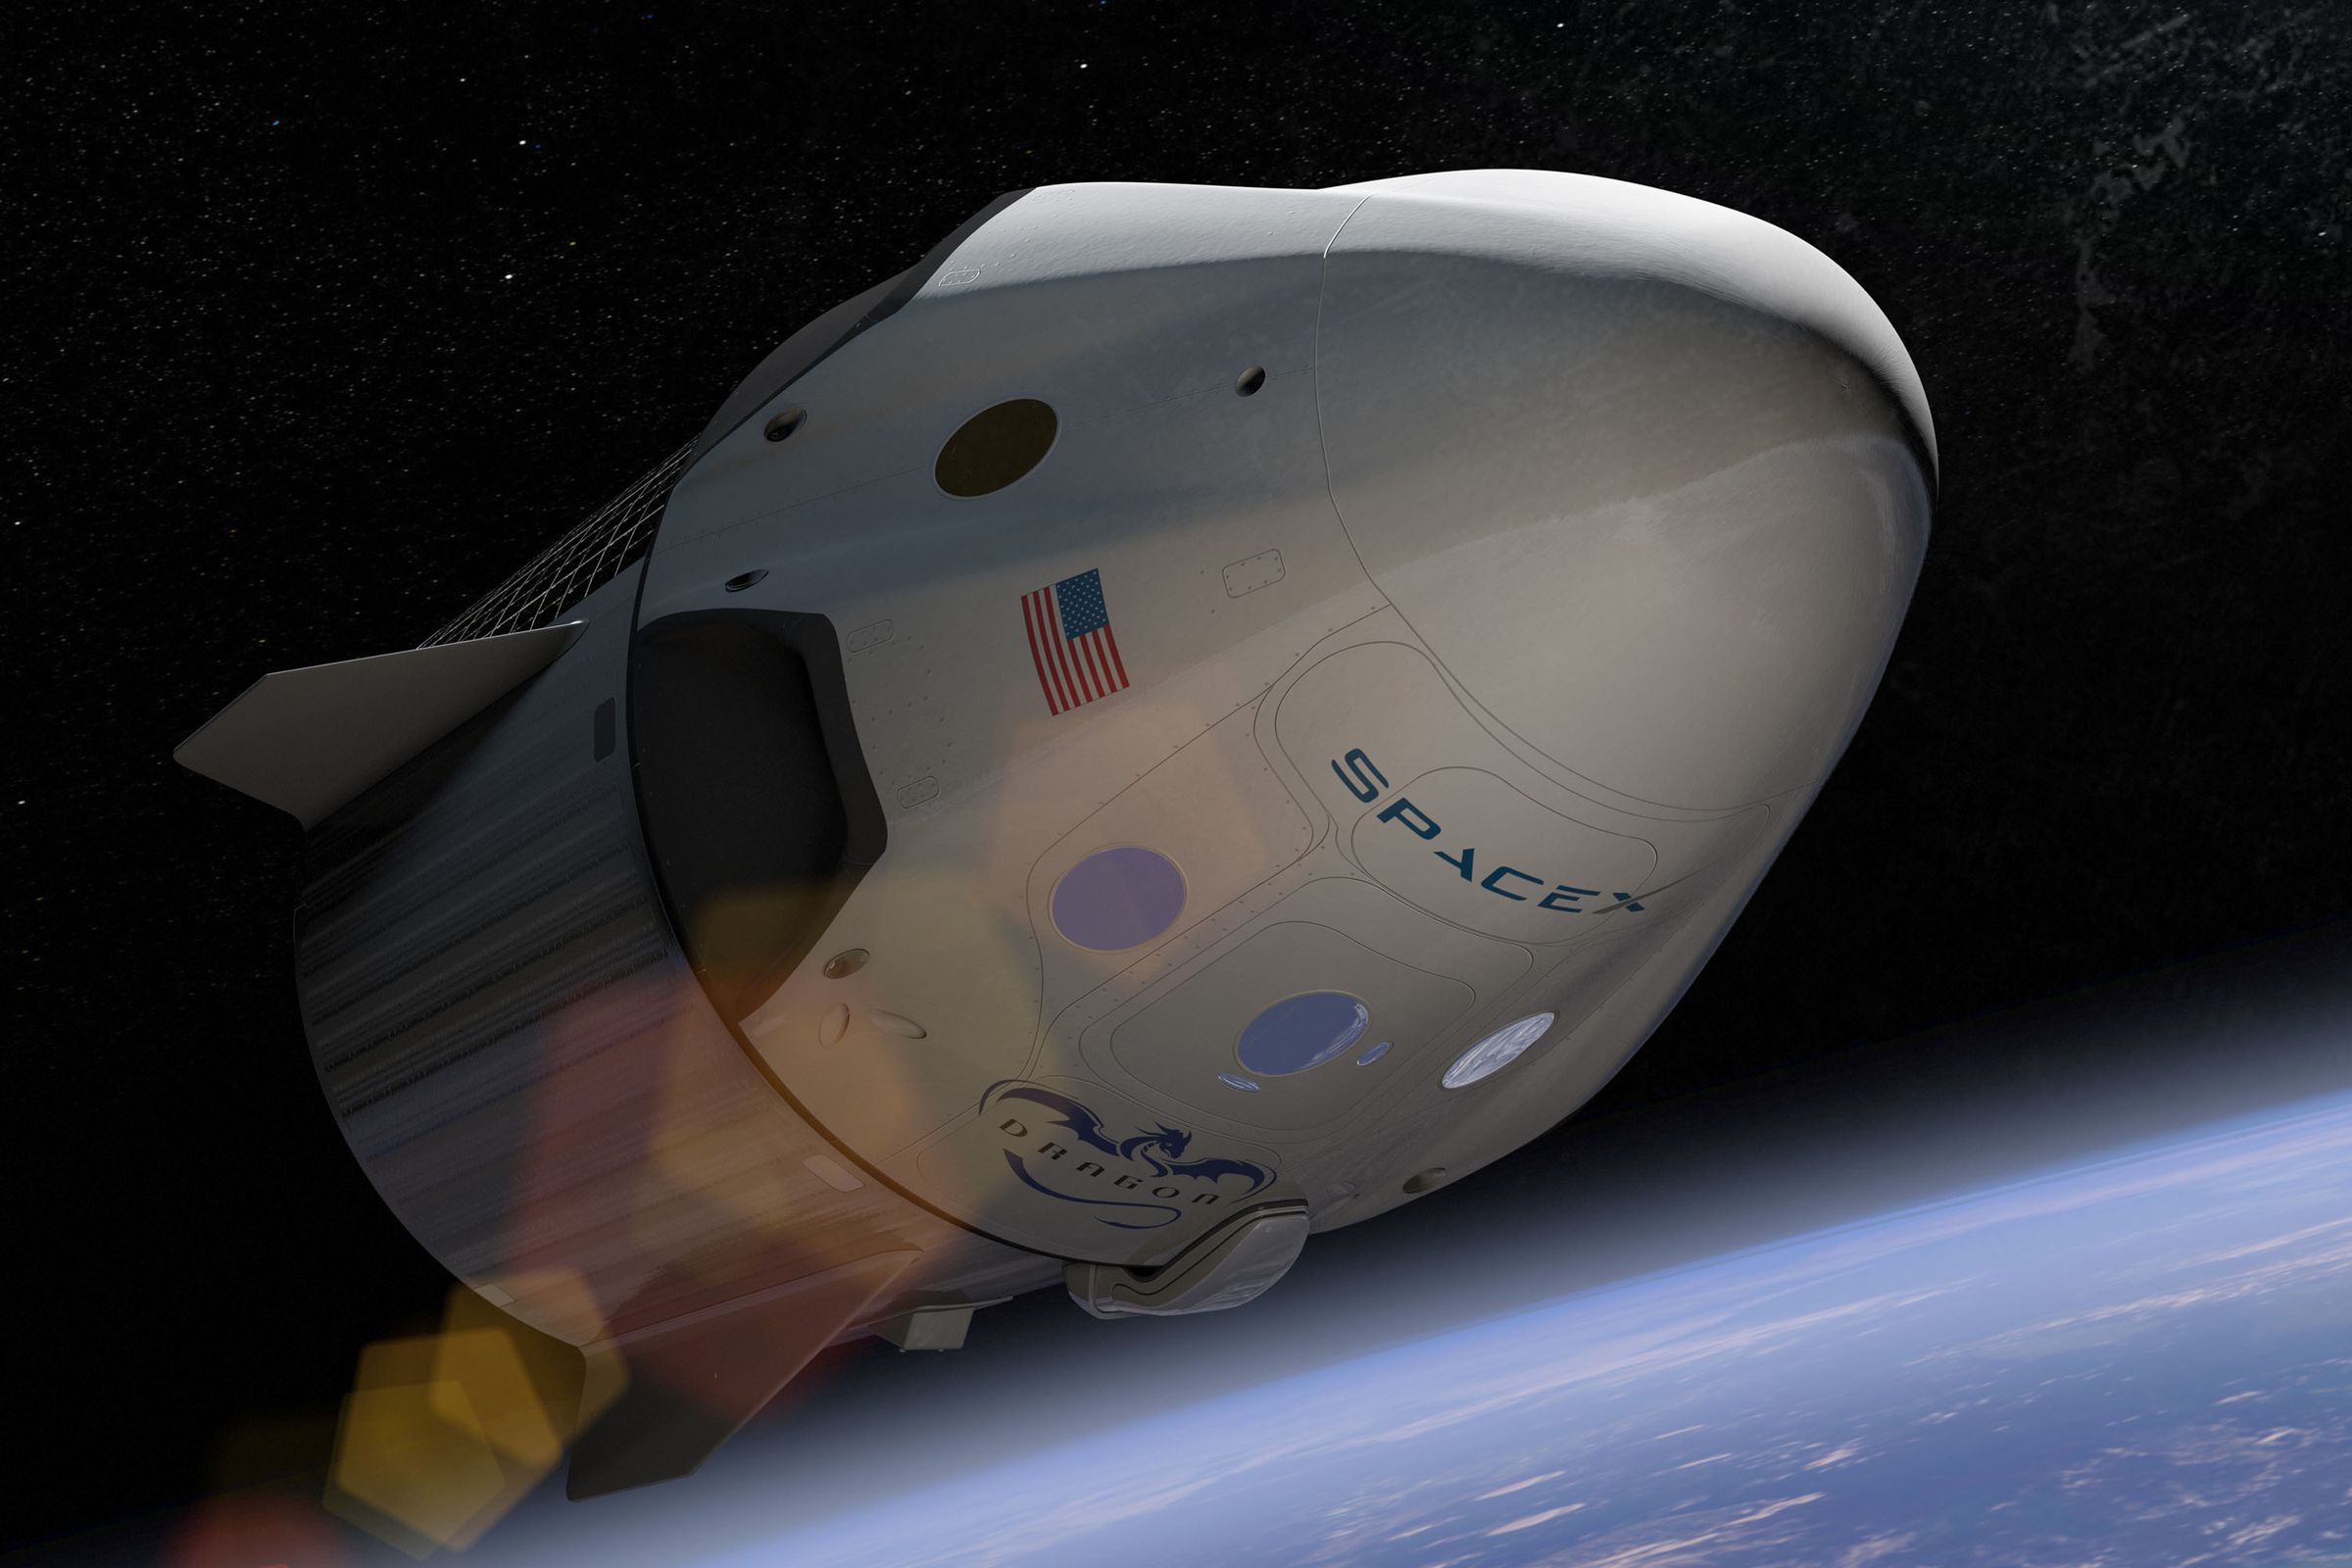  An artistic rendering of SpaceX’s Crew Dragon